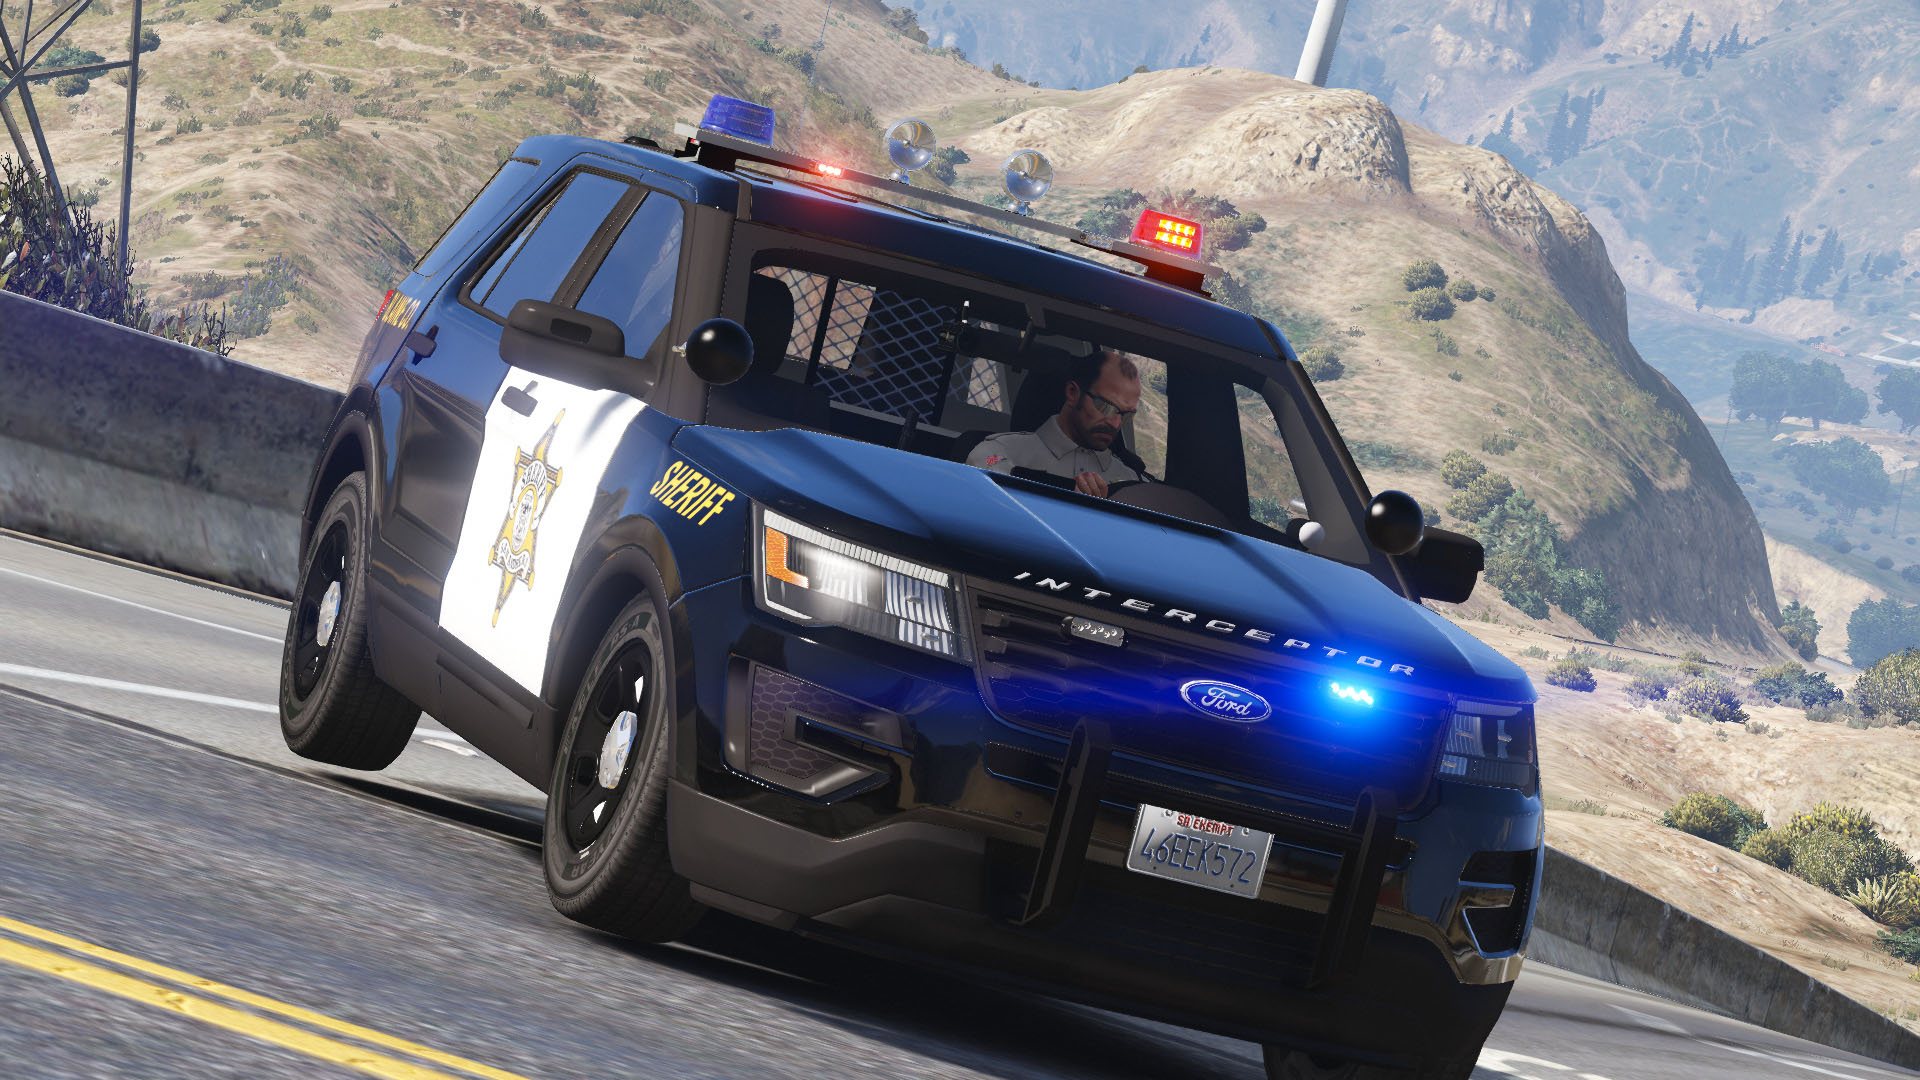 Gta 5 lspdfr wilderness callouts фото 8